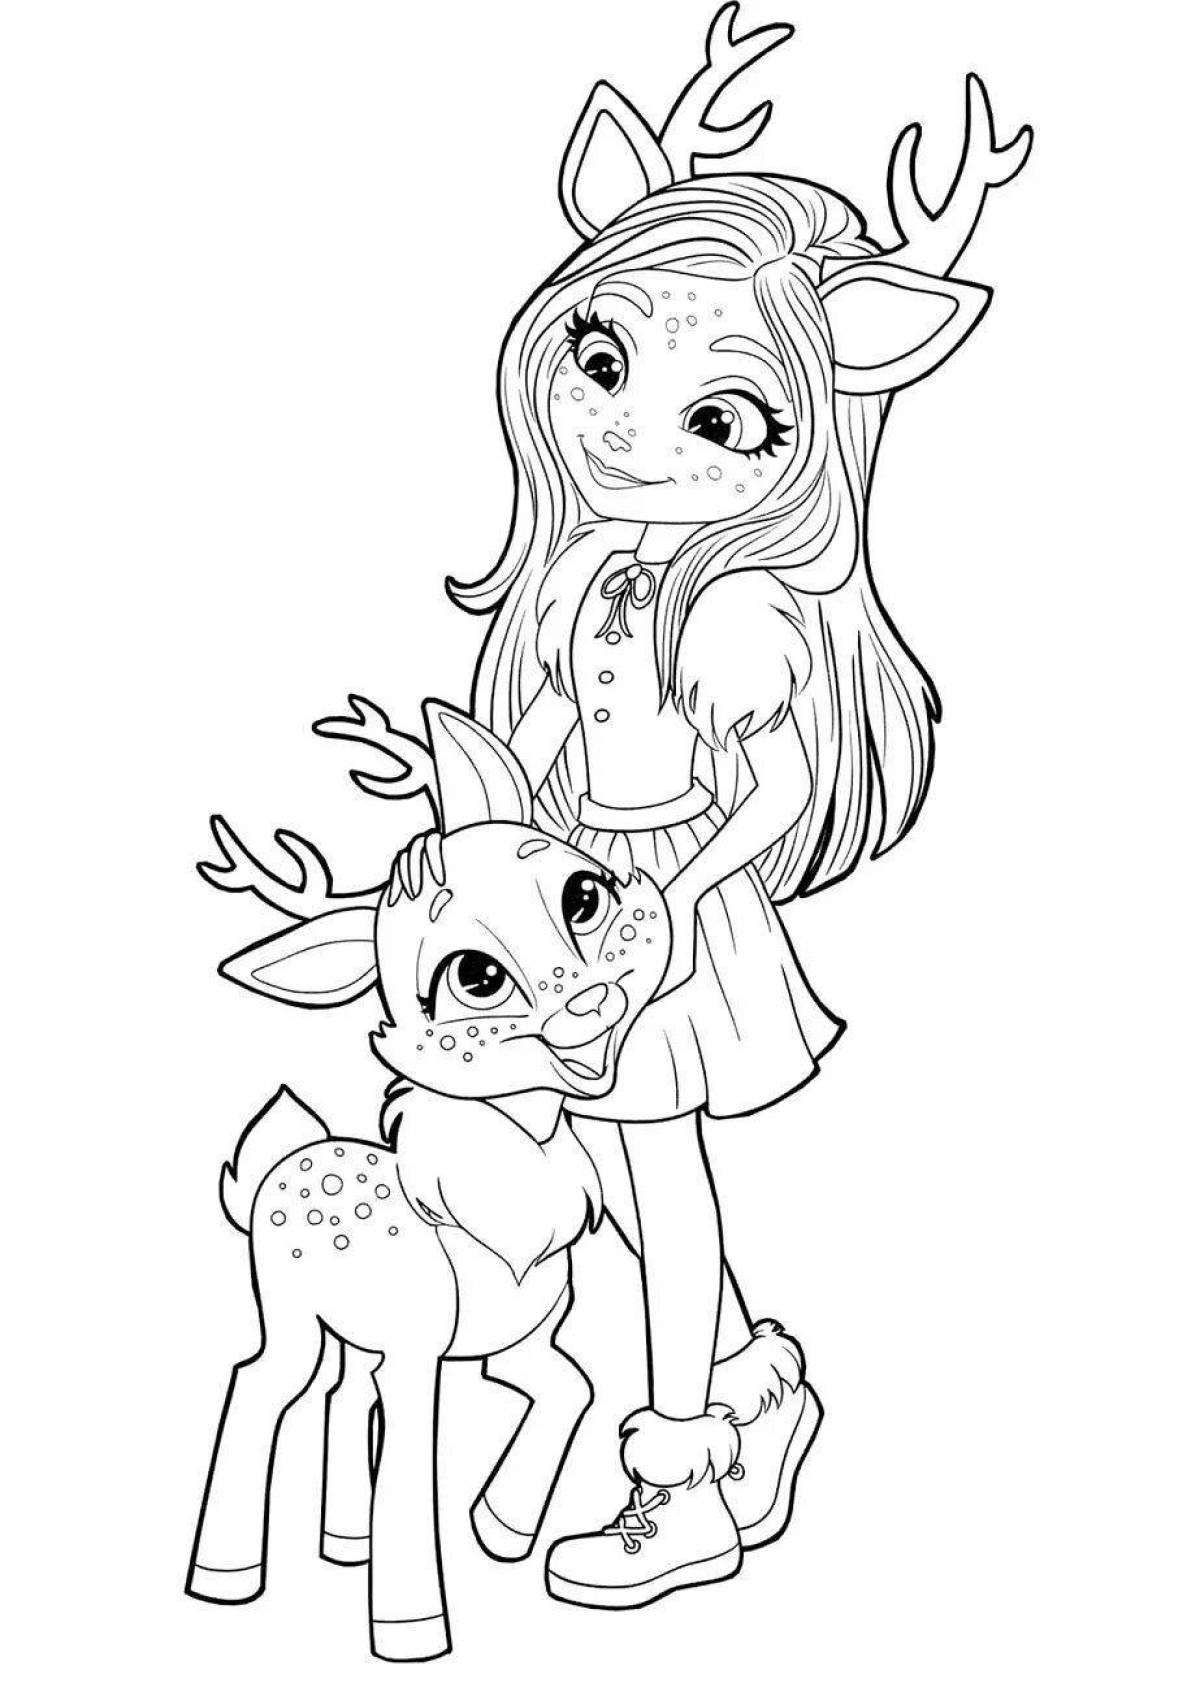 Entenchymaly adorable coloring pages